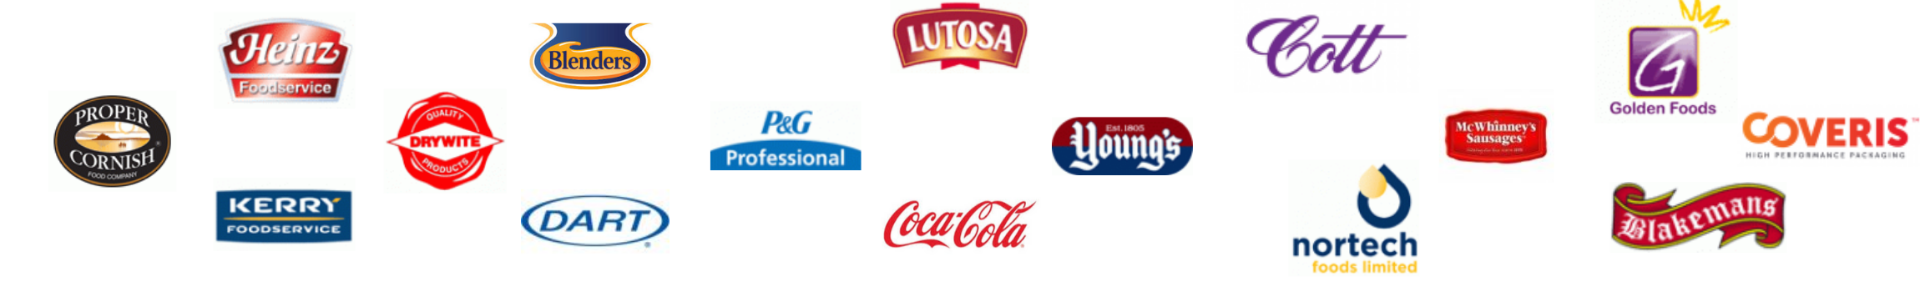 Our_brands